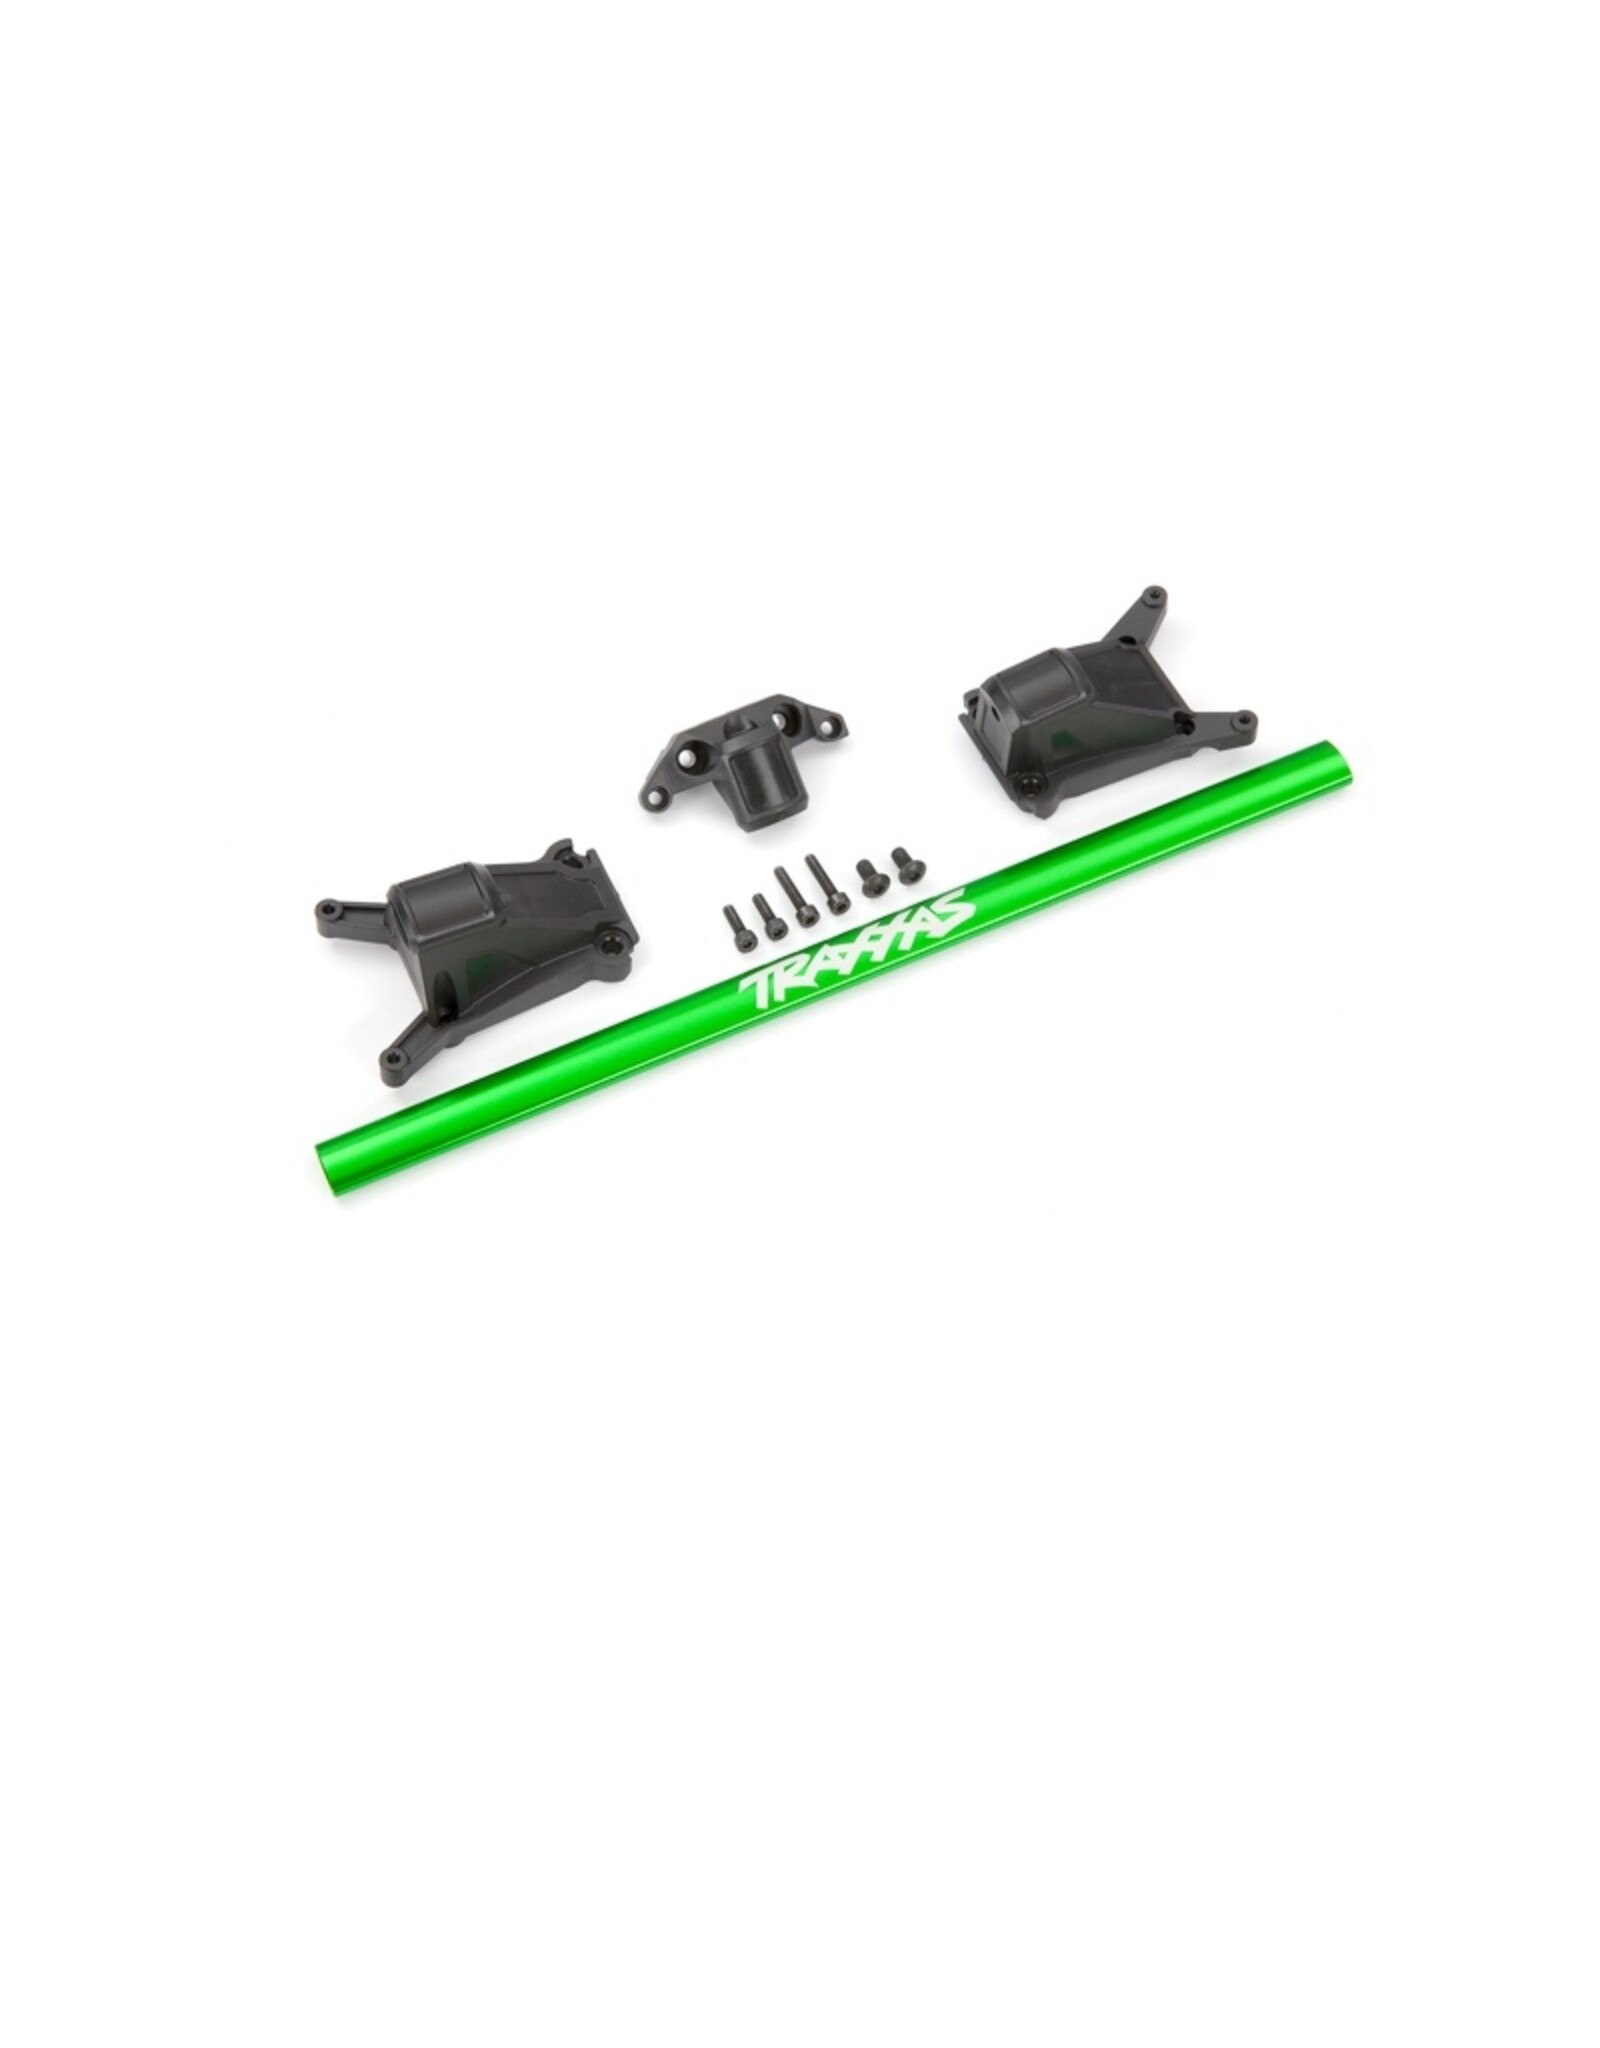 Traxxas TRA6730G - Chassis brace kit, green (fits Rustler® 4X4 or Slash 4X4 models equipped with Low-CG chassis)